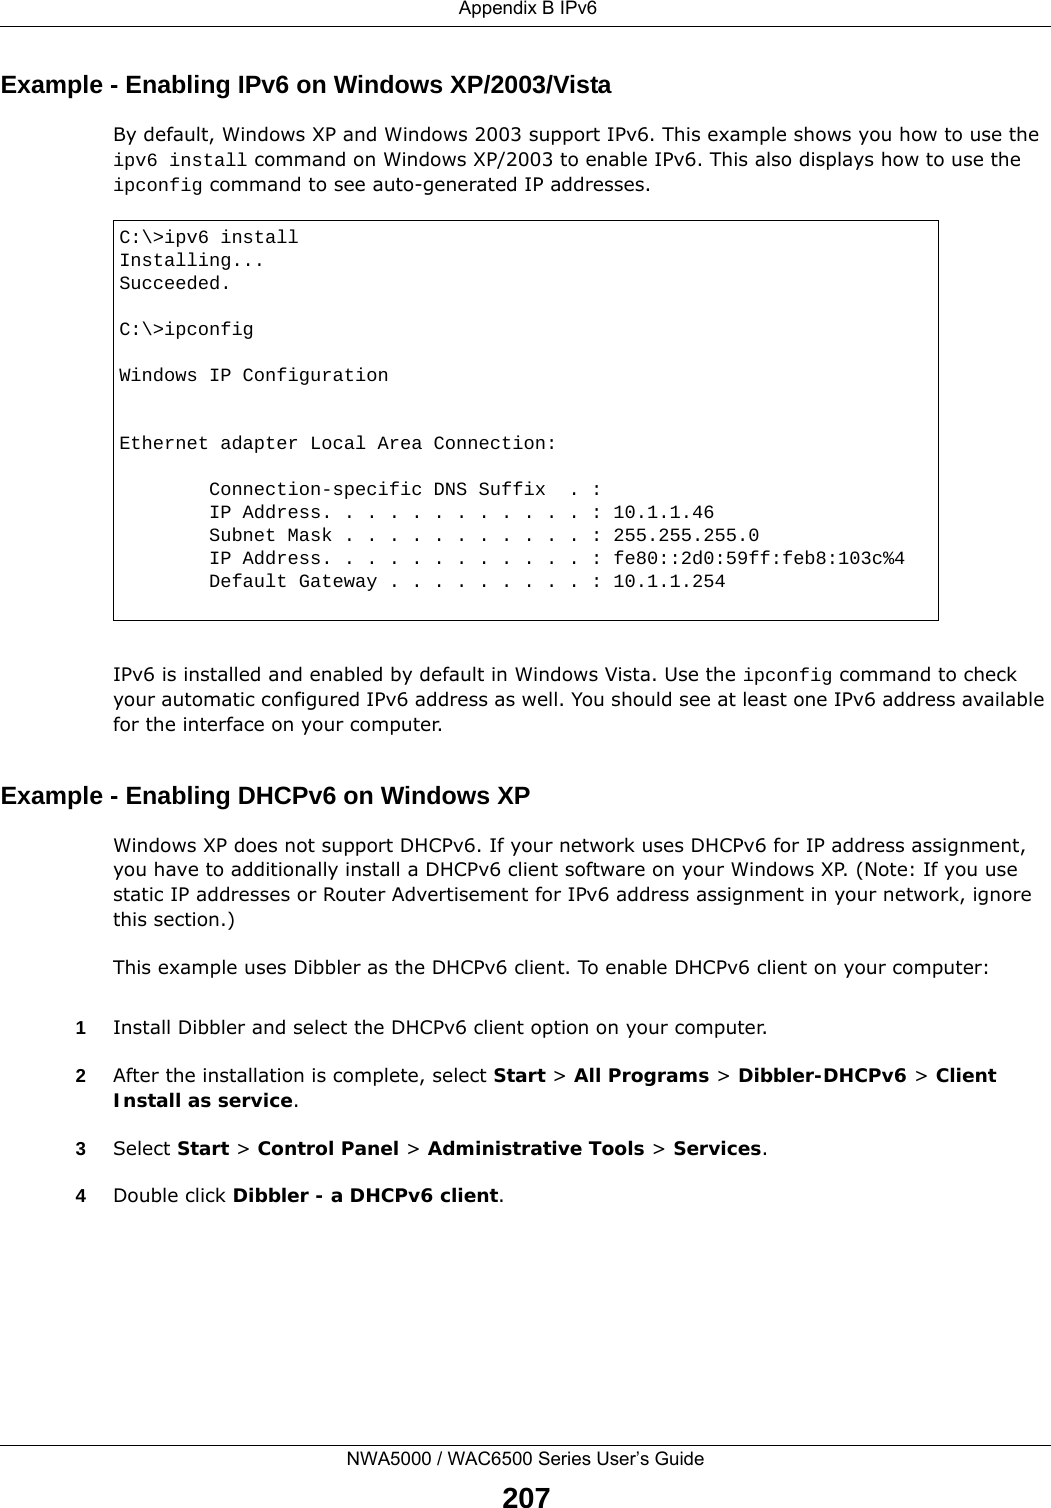  Appendix B IPv6NWA5000 / WAC6500 Series User’s Guide207Example - Enabling IPv6 on Windows XP/2003/VistaBy default, Windows XP and Windows 2003 support IPv6. This example shows you how to use the ipv6 install command on Windows XP/2003 to enable IPv6. This also displays how to use the ipconfig command to see auto-generated IP addresses.IPv6 is installed and enabled by default in Windows Vista. Use the ipconfig command to check your automatic configured IPv6 address as well. You should see at least one IPv6 address available for the interface on your computer.Example - Enabling DHCPv6 on Windows XPWindows XP does not support DHCPv6. If your network uses DHCPv6 for IP address assignment, you have to additionally install a DHCPv6 client software on your Windows XP. (Note: If you use static IP addresses or Router Advertisement for IPv6 address assignment in your network, ignore this section.)This example uses Dibbler as the DHCPv6 client. To enable DHCPv6 client on your computer:1Install Dibbler and select the DHCPv6 client option on your computer.2After the installation is complete, select Start &gt; All Programs &gt; Dibbler-DHCPv6 &gt; Client Install as service.3Select Start &gt; Control Panel &gt; Administrative Tools &gt; Services.4Double click Dibbler - a DHCPv6 client.C:\&gt;ipv6 installInstalling...Succeeded.C:\&gt;ipconfigWindows IP ConfigurationEthernet adapter Local Area Connection:        Connection-specific DNS Suffix  . :         IP Address. . . . . . . . . . . . : 10.1.1.46        Subnet Mask . . . . . . . . . . . : 255.255.255.0        IP Address. . . . . . . . . . . . : fe80::2d0:59ff:feb8:103c%4        Default Gateway . . . . . . . . . : 10.1.1.254